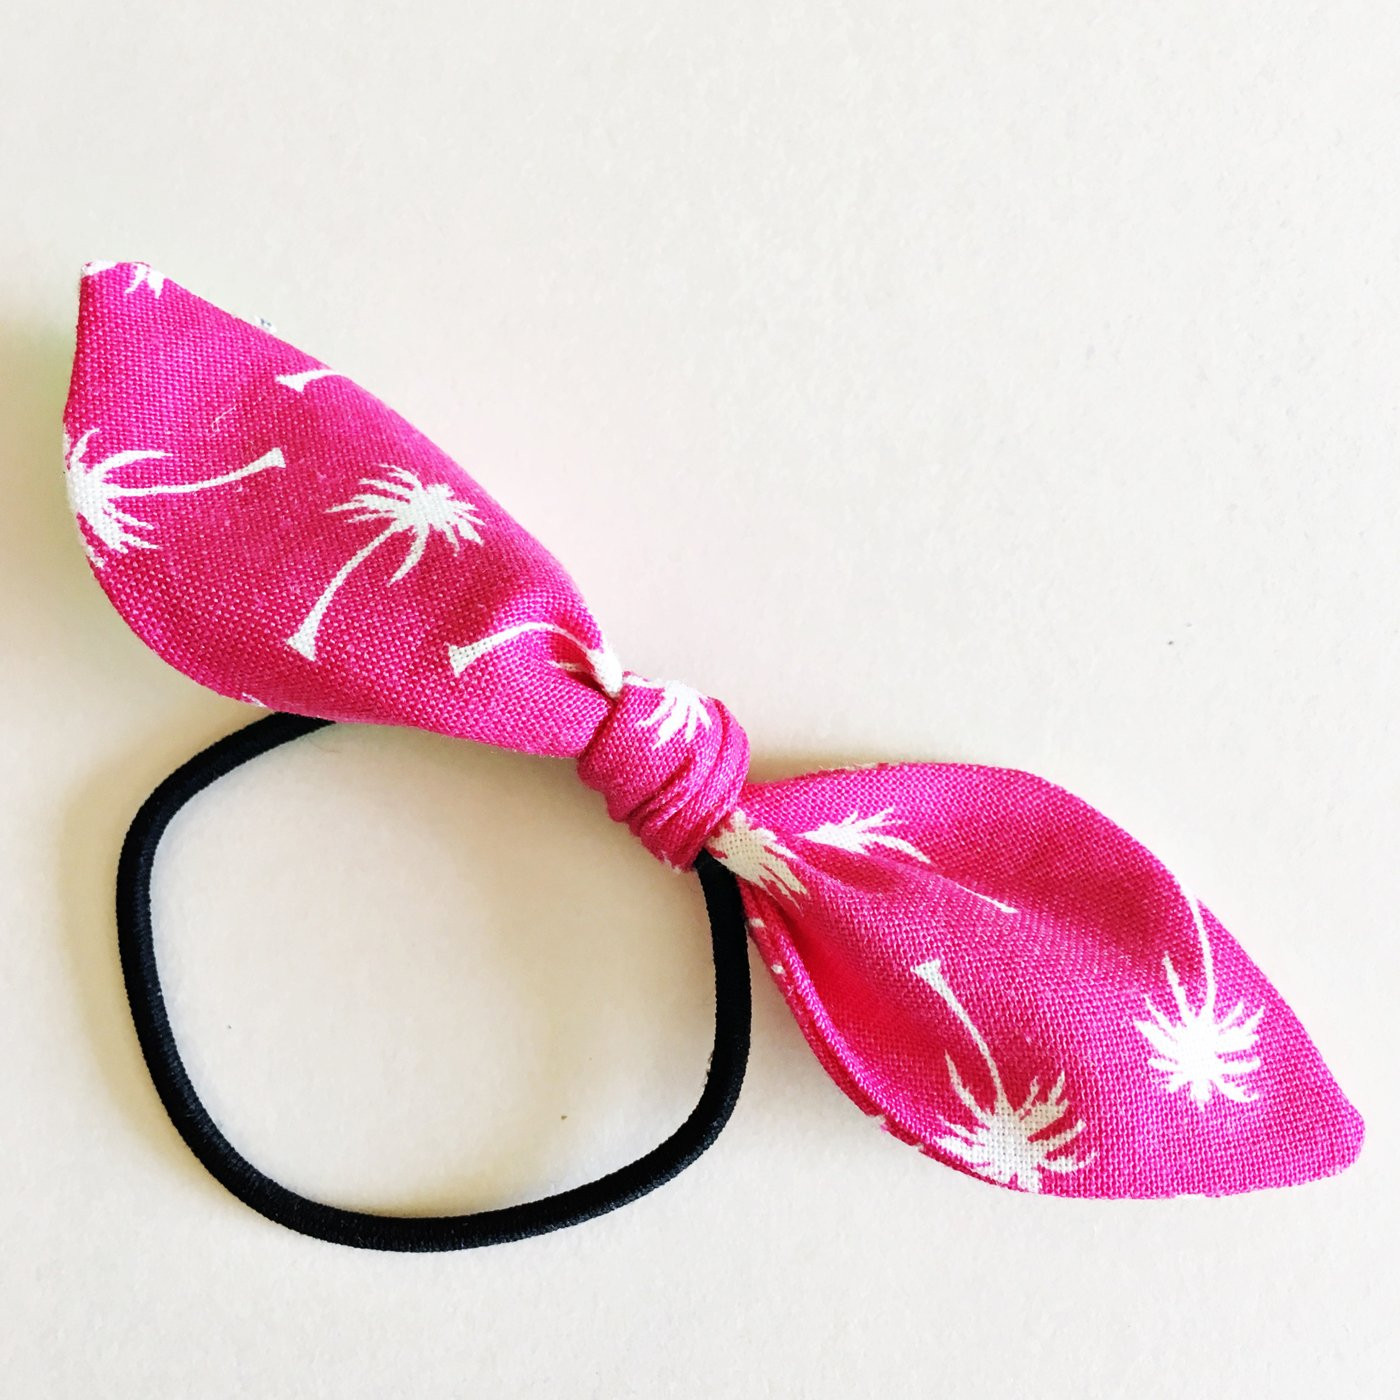 DIY Hair Tie
 How to Make Knotted Hair Ties The Polka Dot Chair